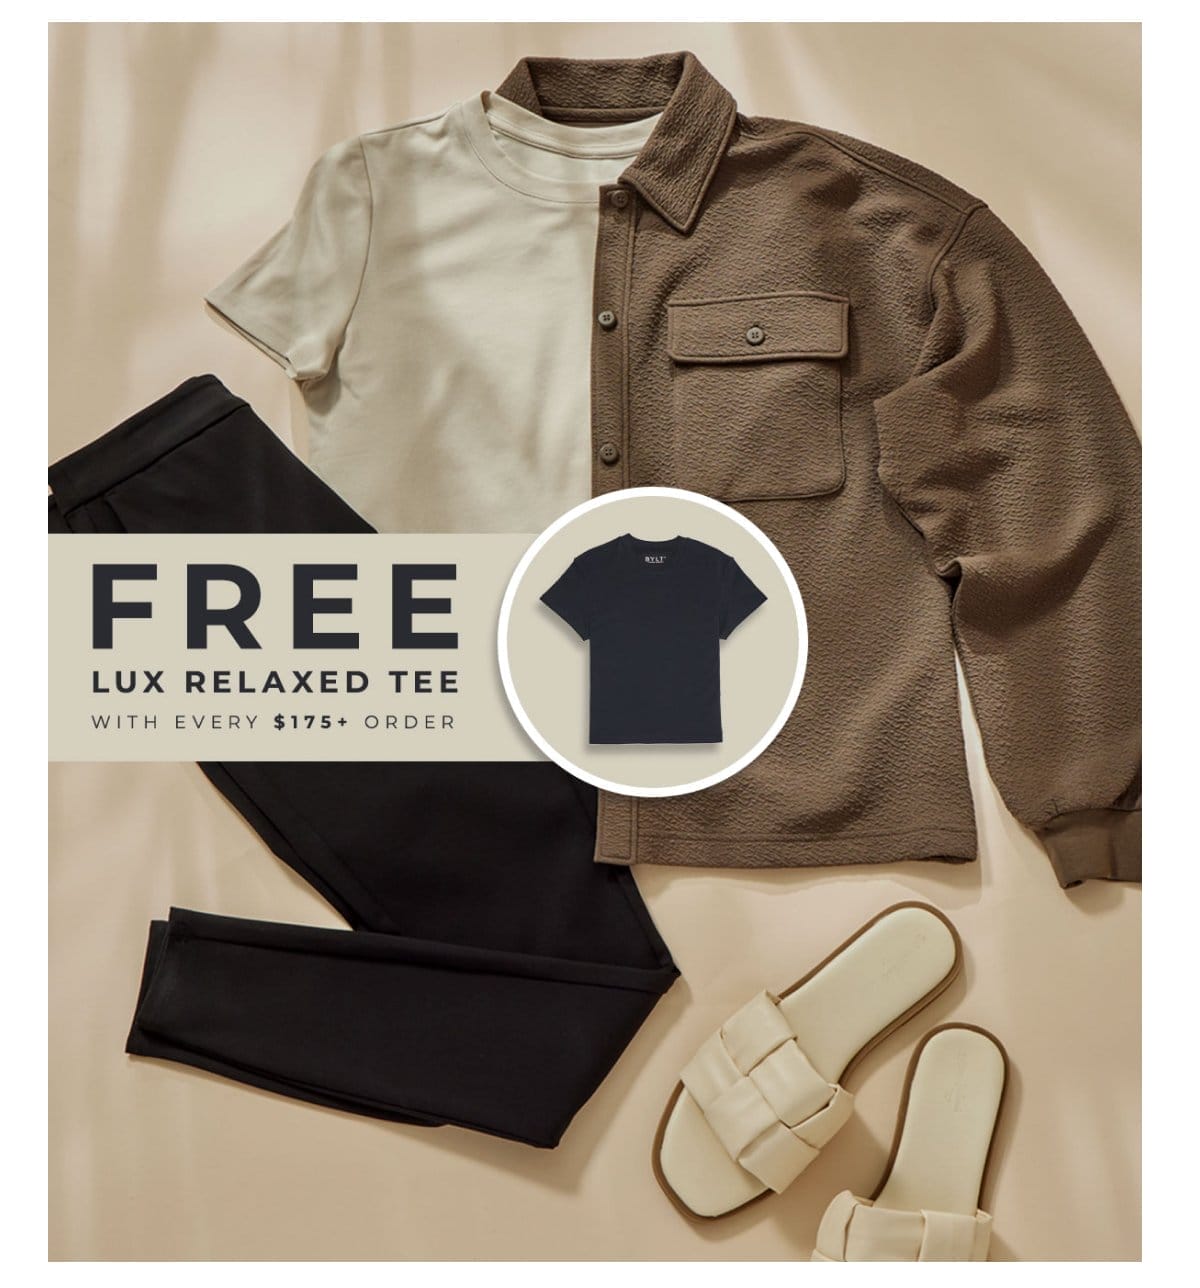 Free Gift with Purchases \\$175+